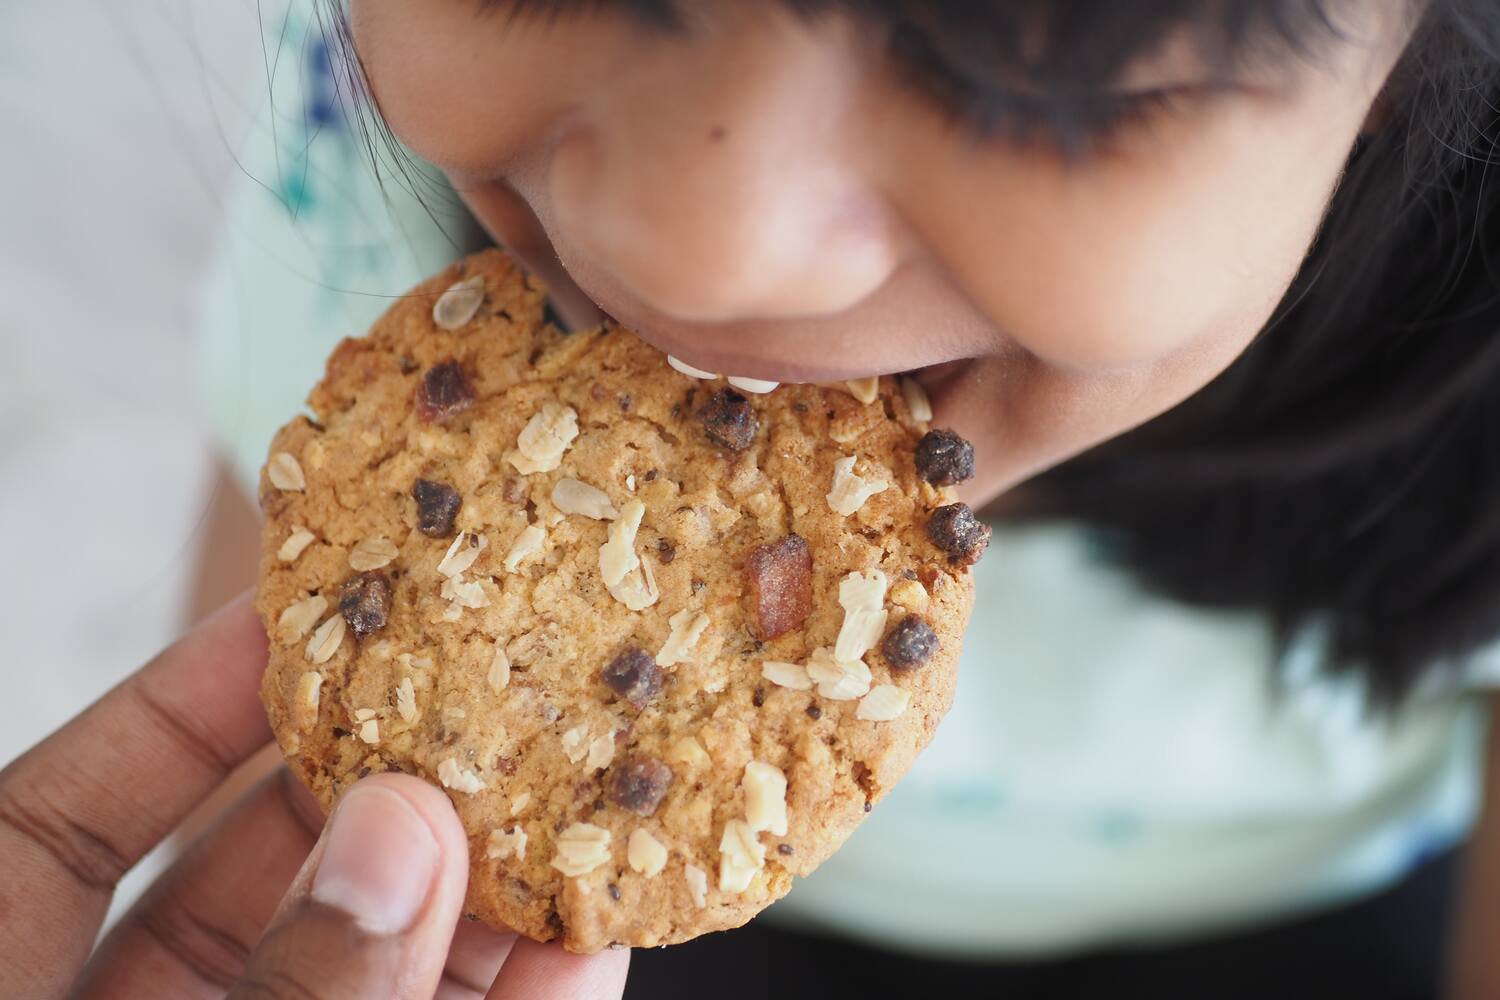 Whole grains have several benefits for kids